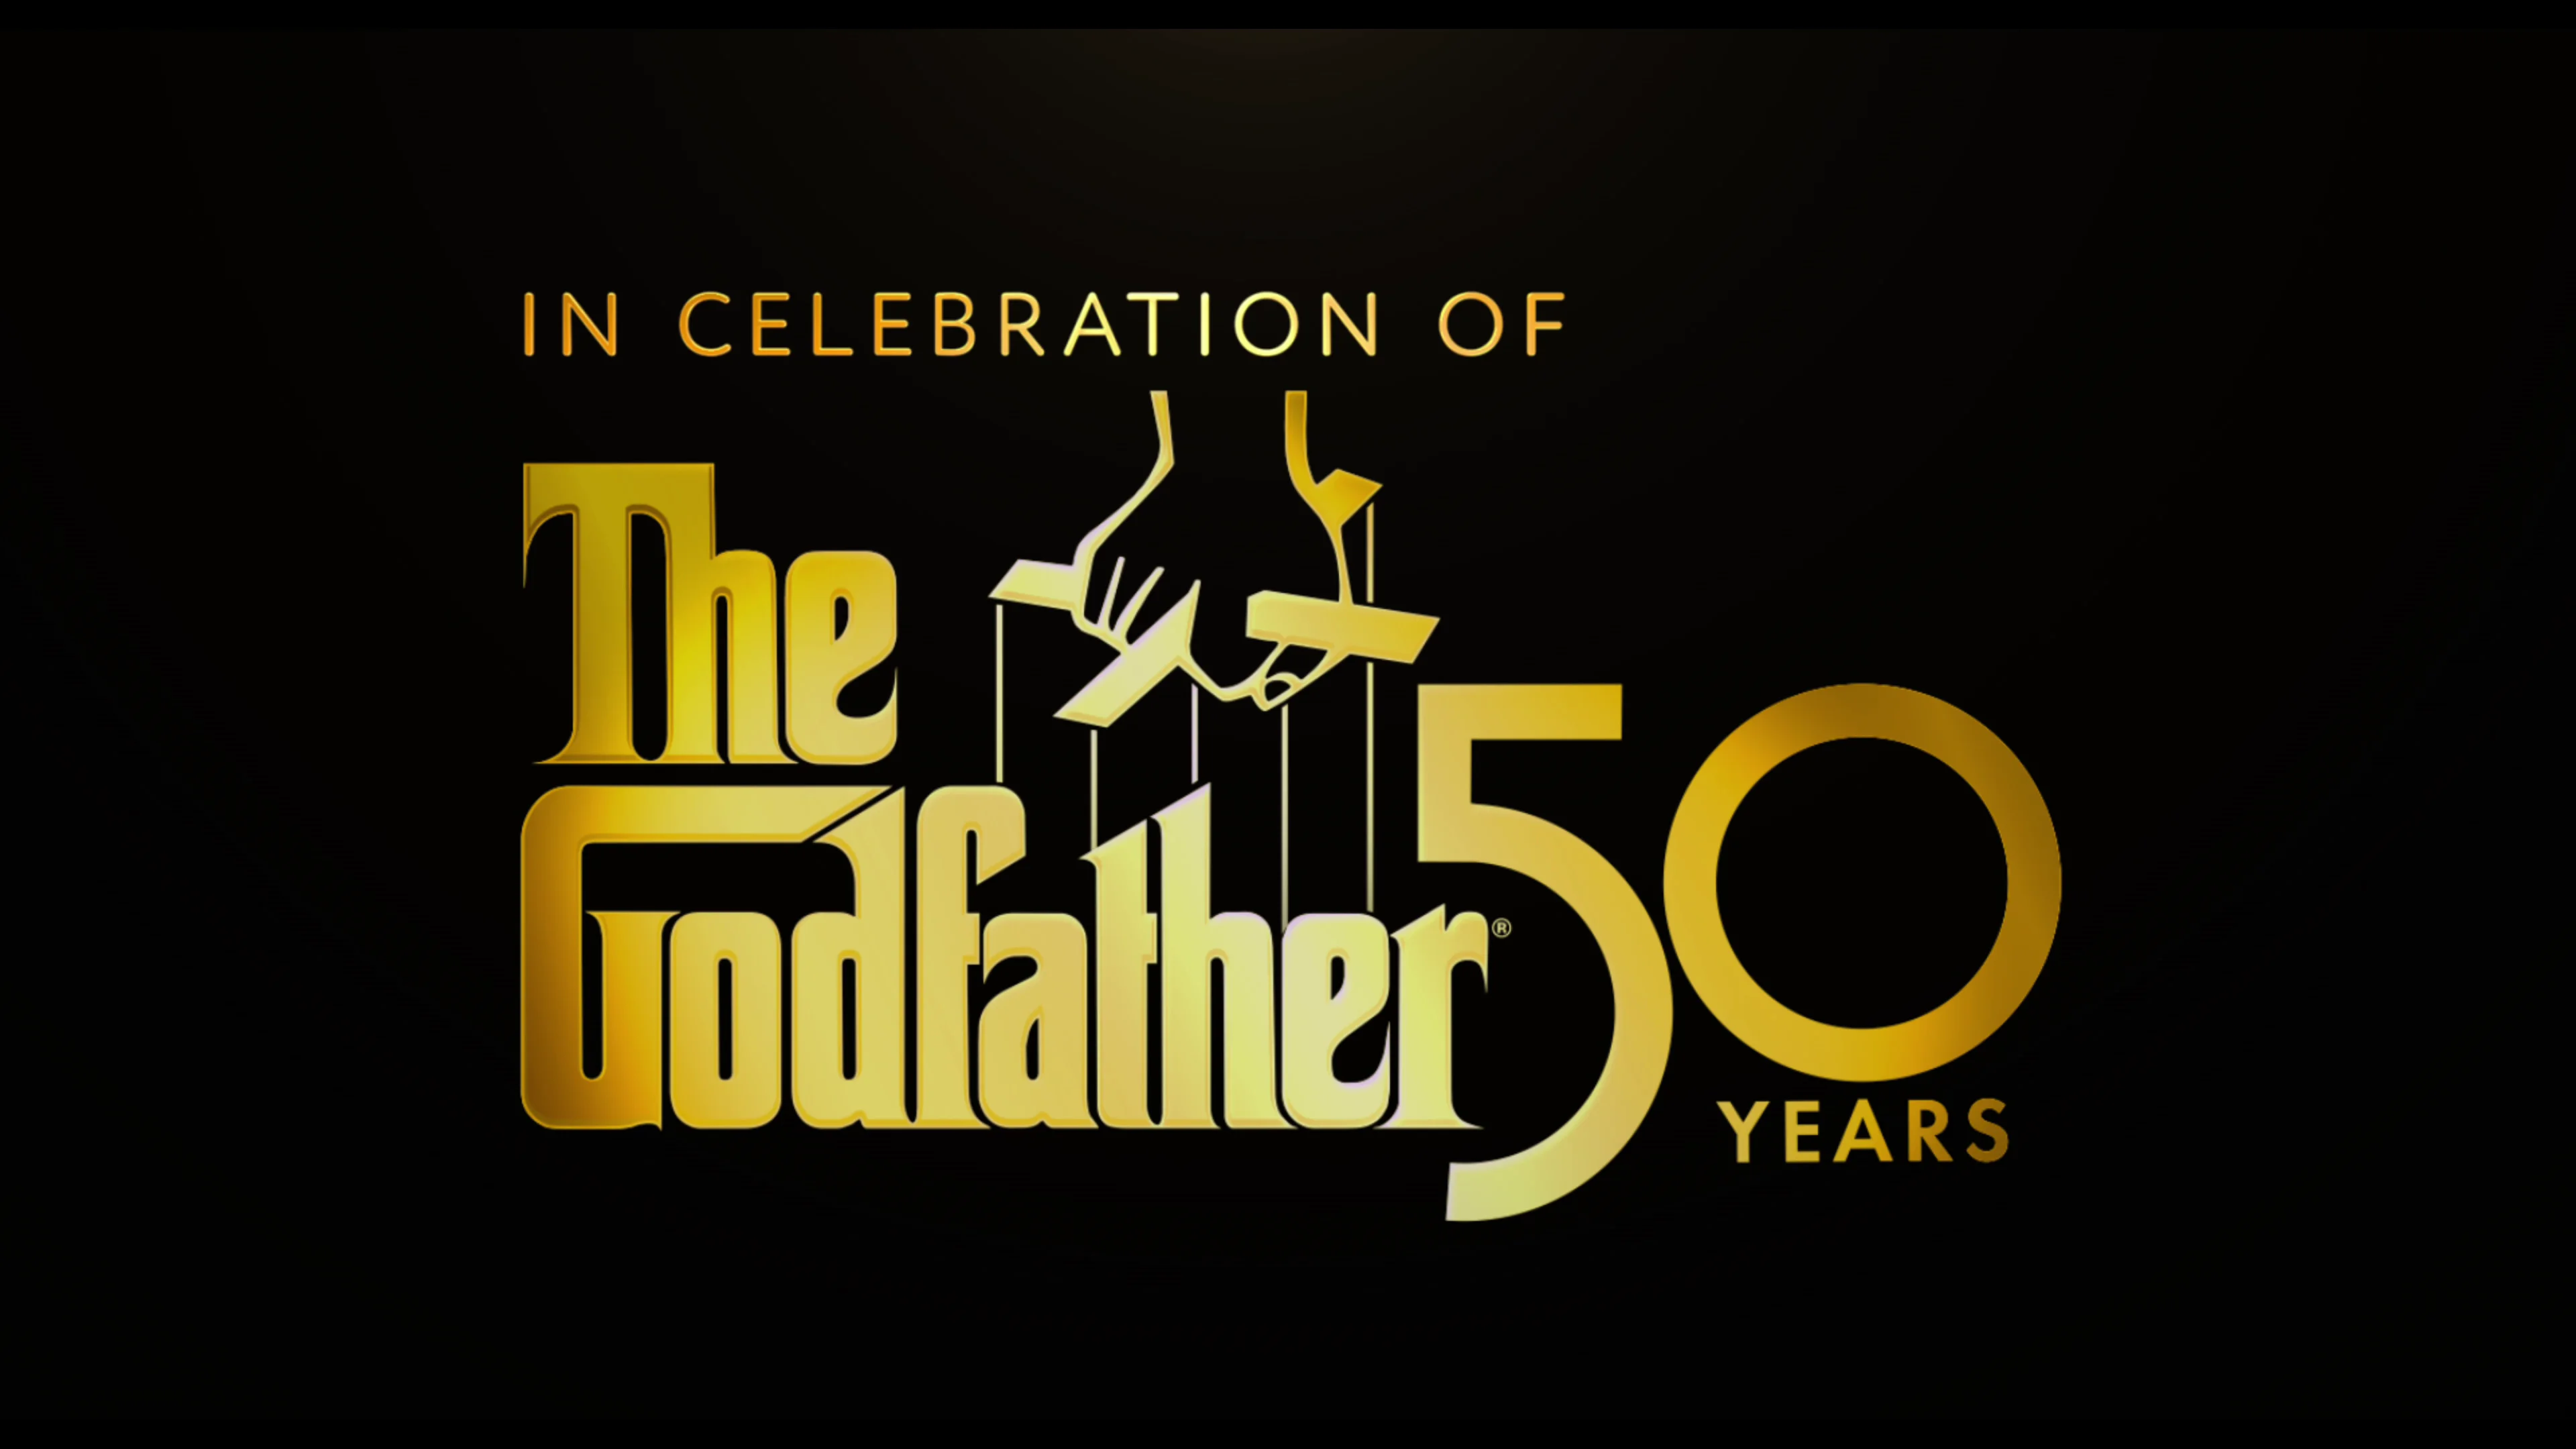 The Godfather 50th Anniversary, Franchise Trailer